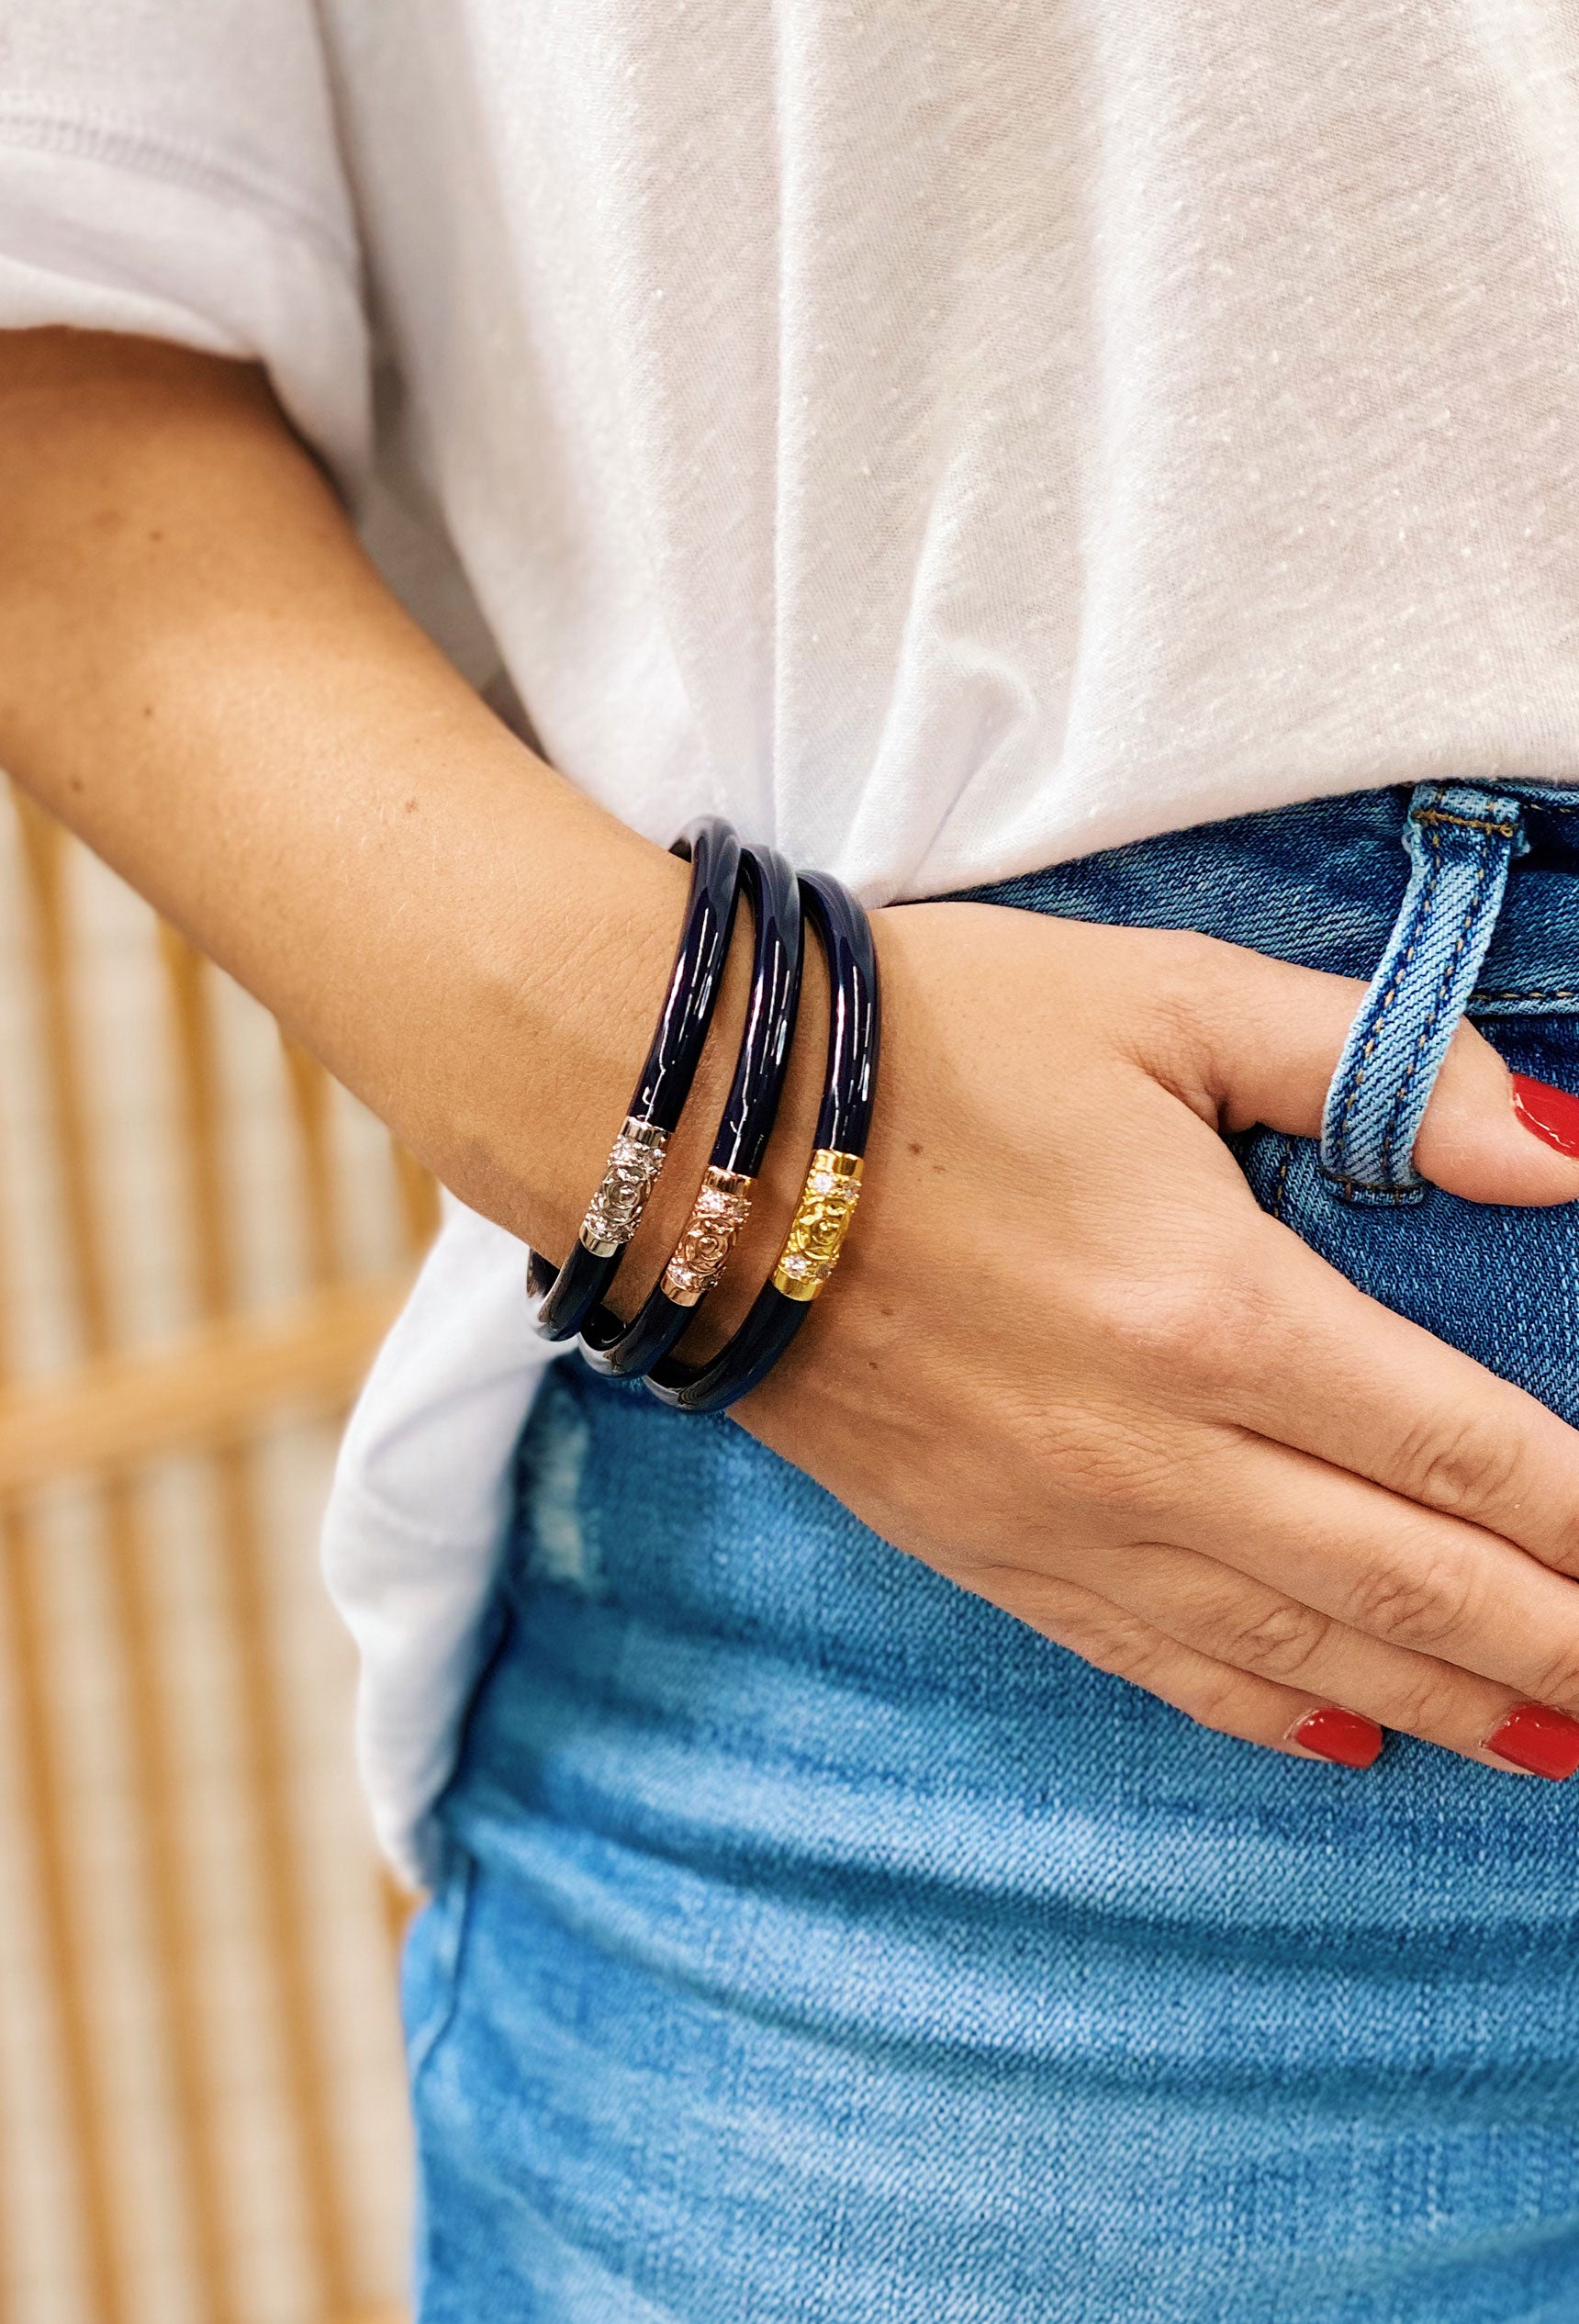 BUDHAGIRL Three Kings All Weather Bangles in Navy, Three navy bangles, one with gold detail, one with silver detailing, and one with copper detailing 